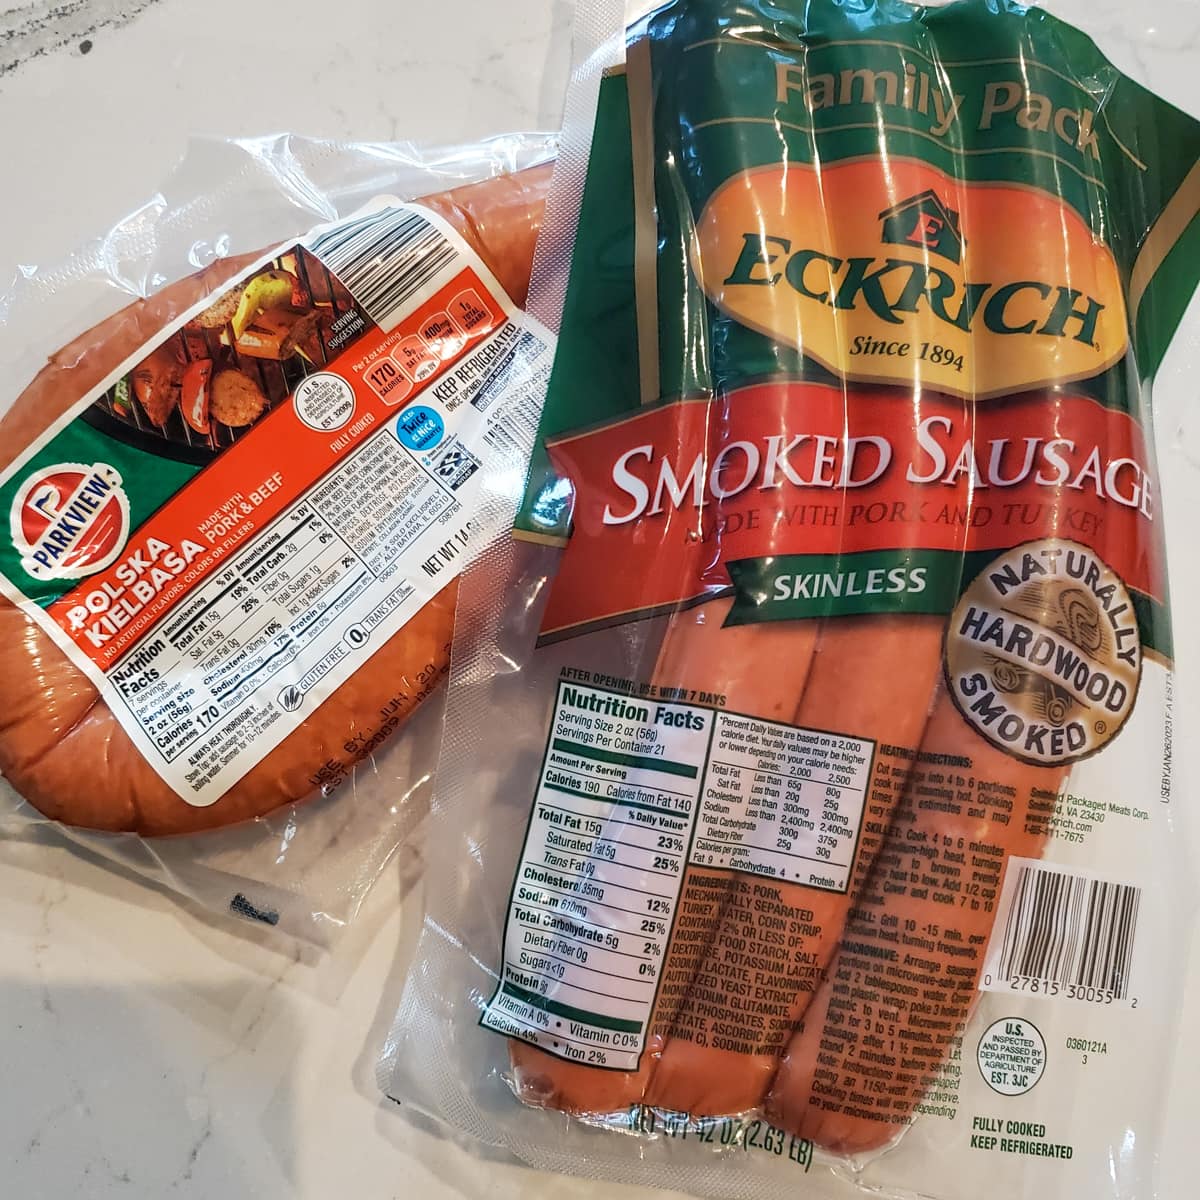 Packages of smoked sausage and andouille sausage.